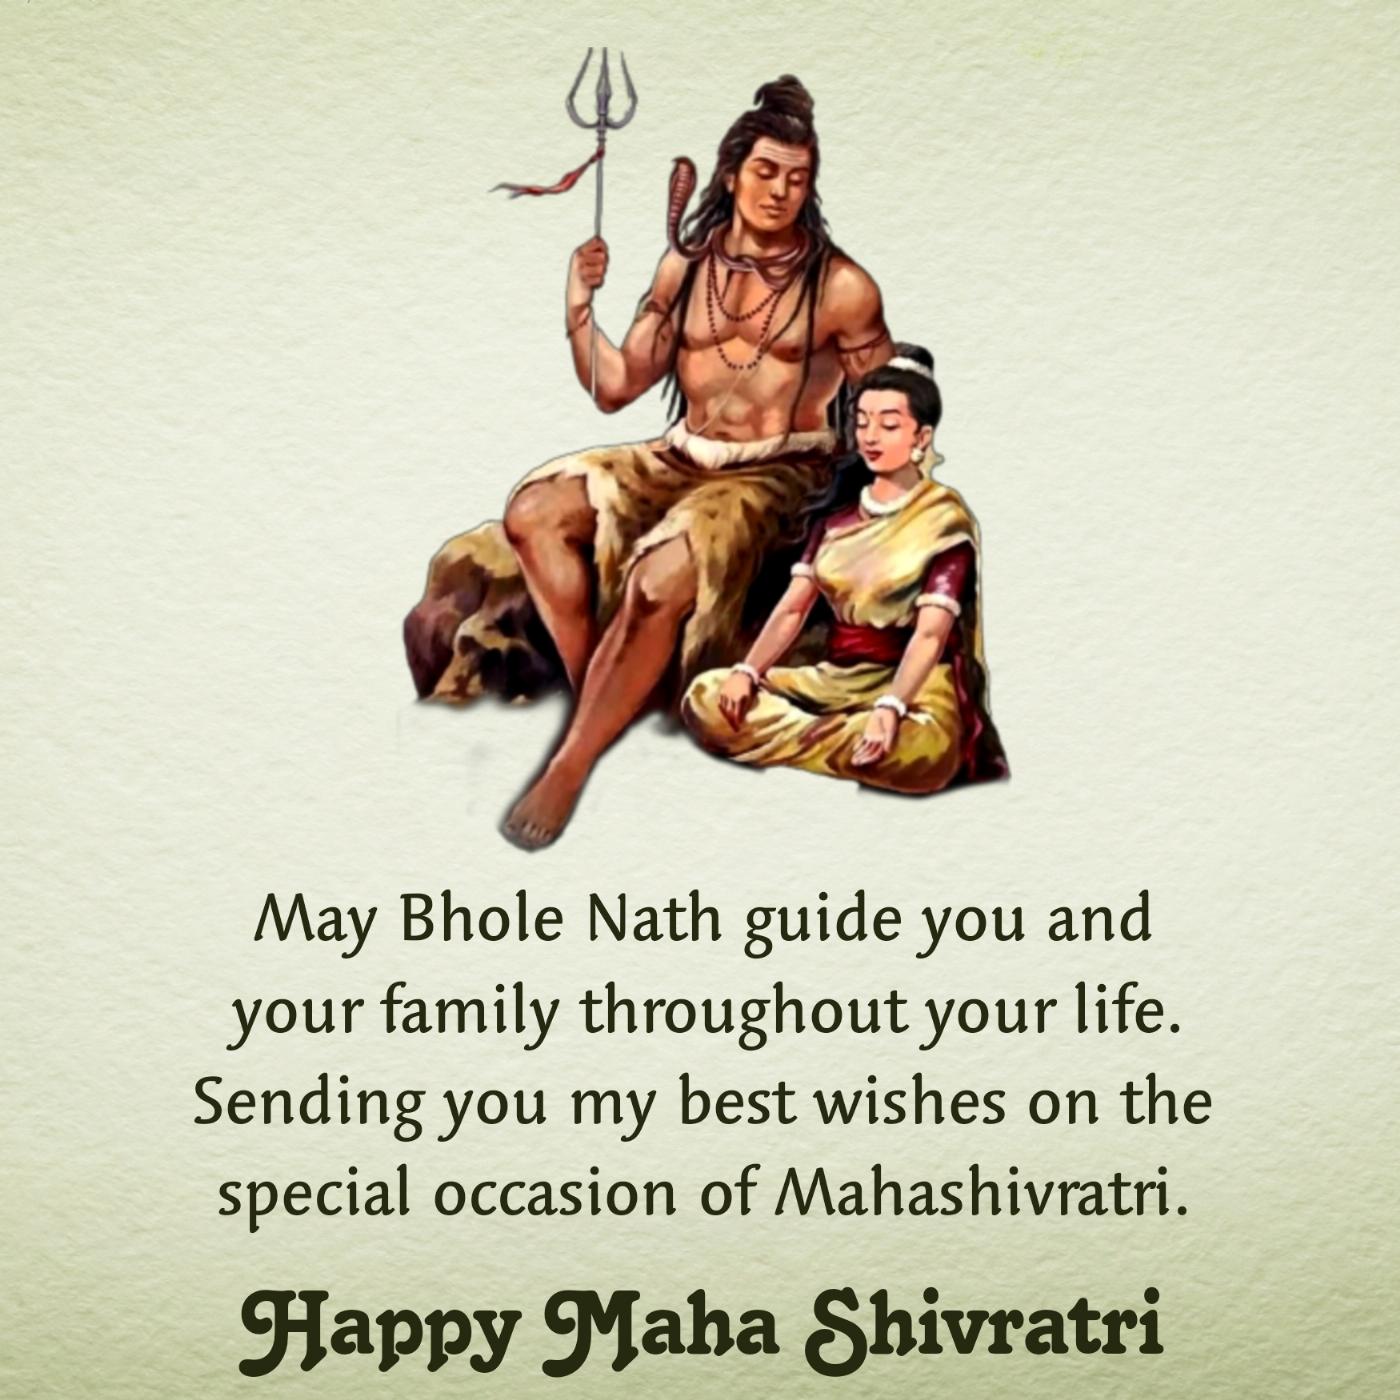 May Bhole Nath guide you and your family throughout your life